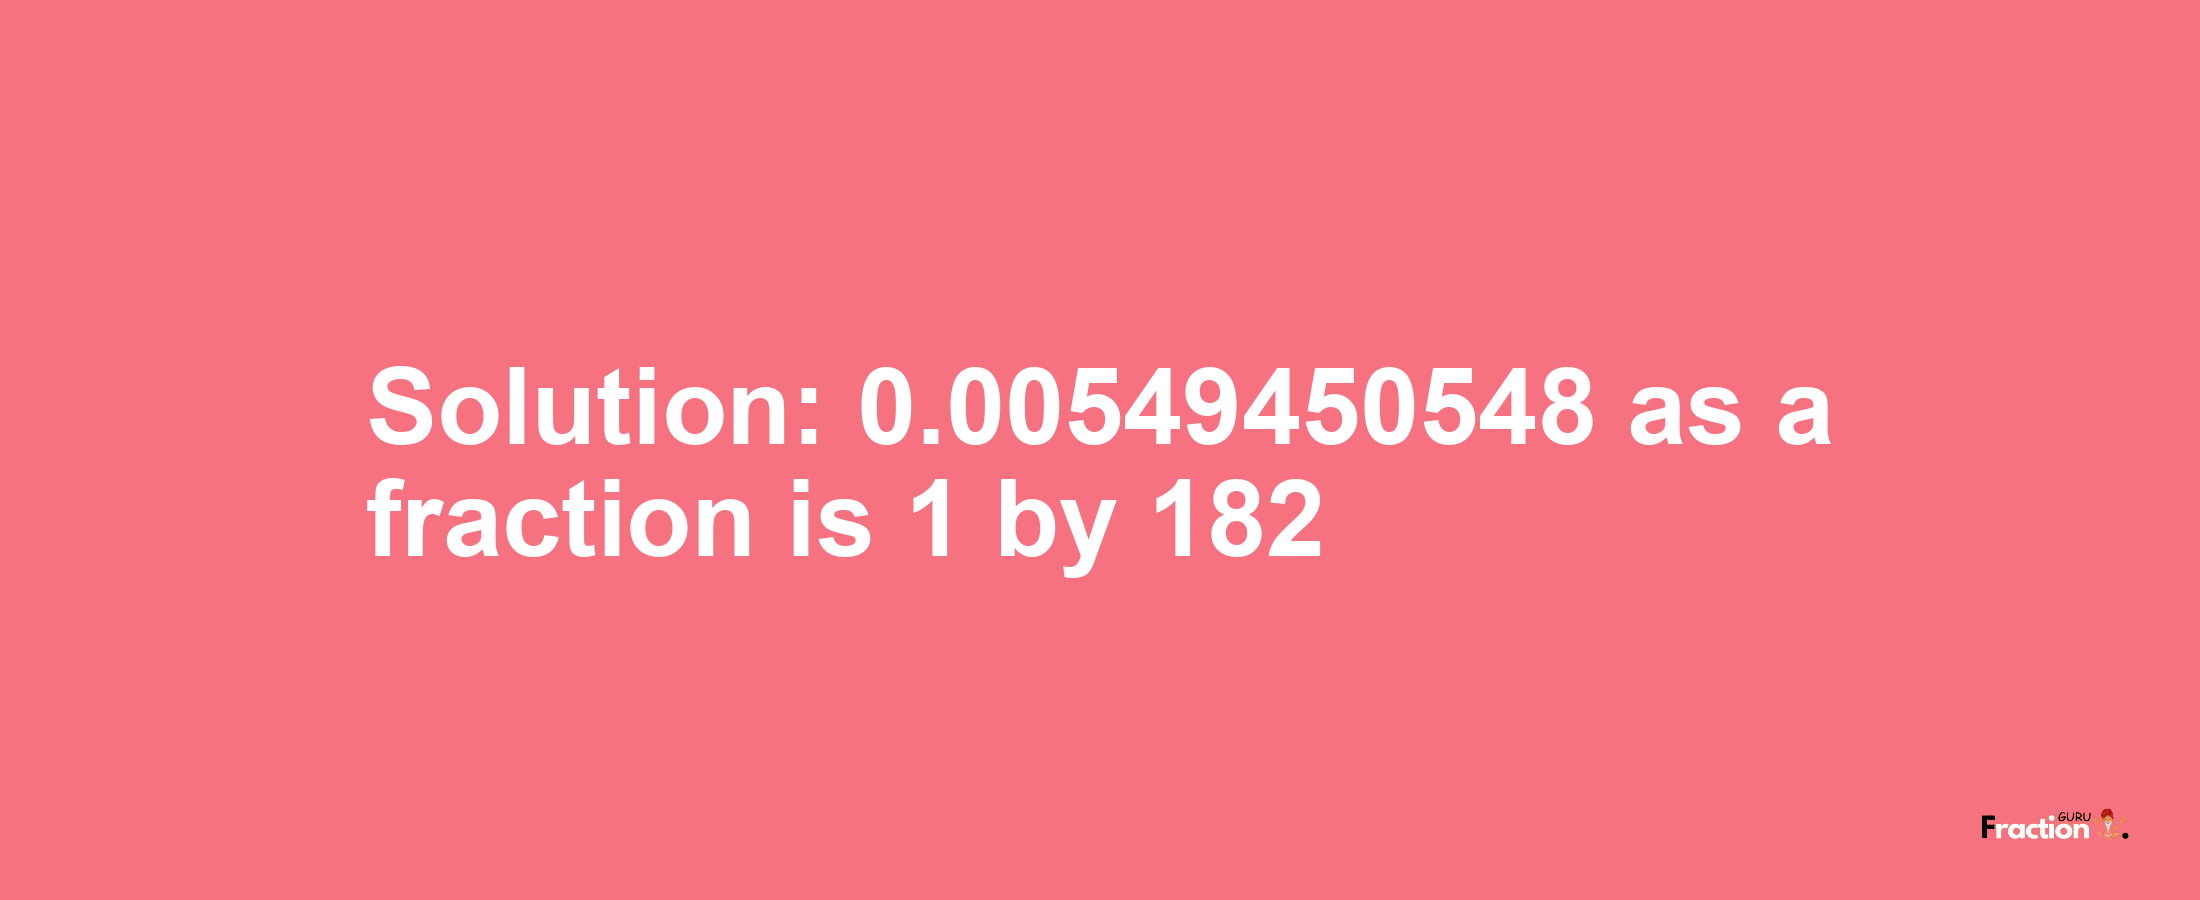 Solution:0.00549450548 as a fraction is 1/182